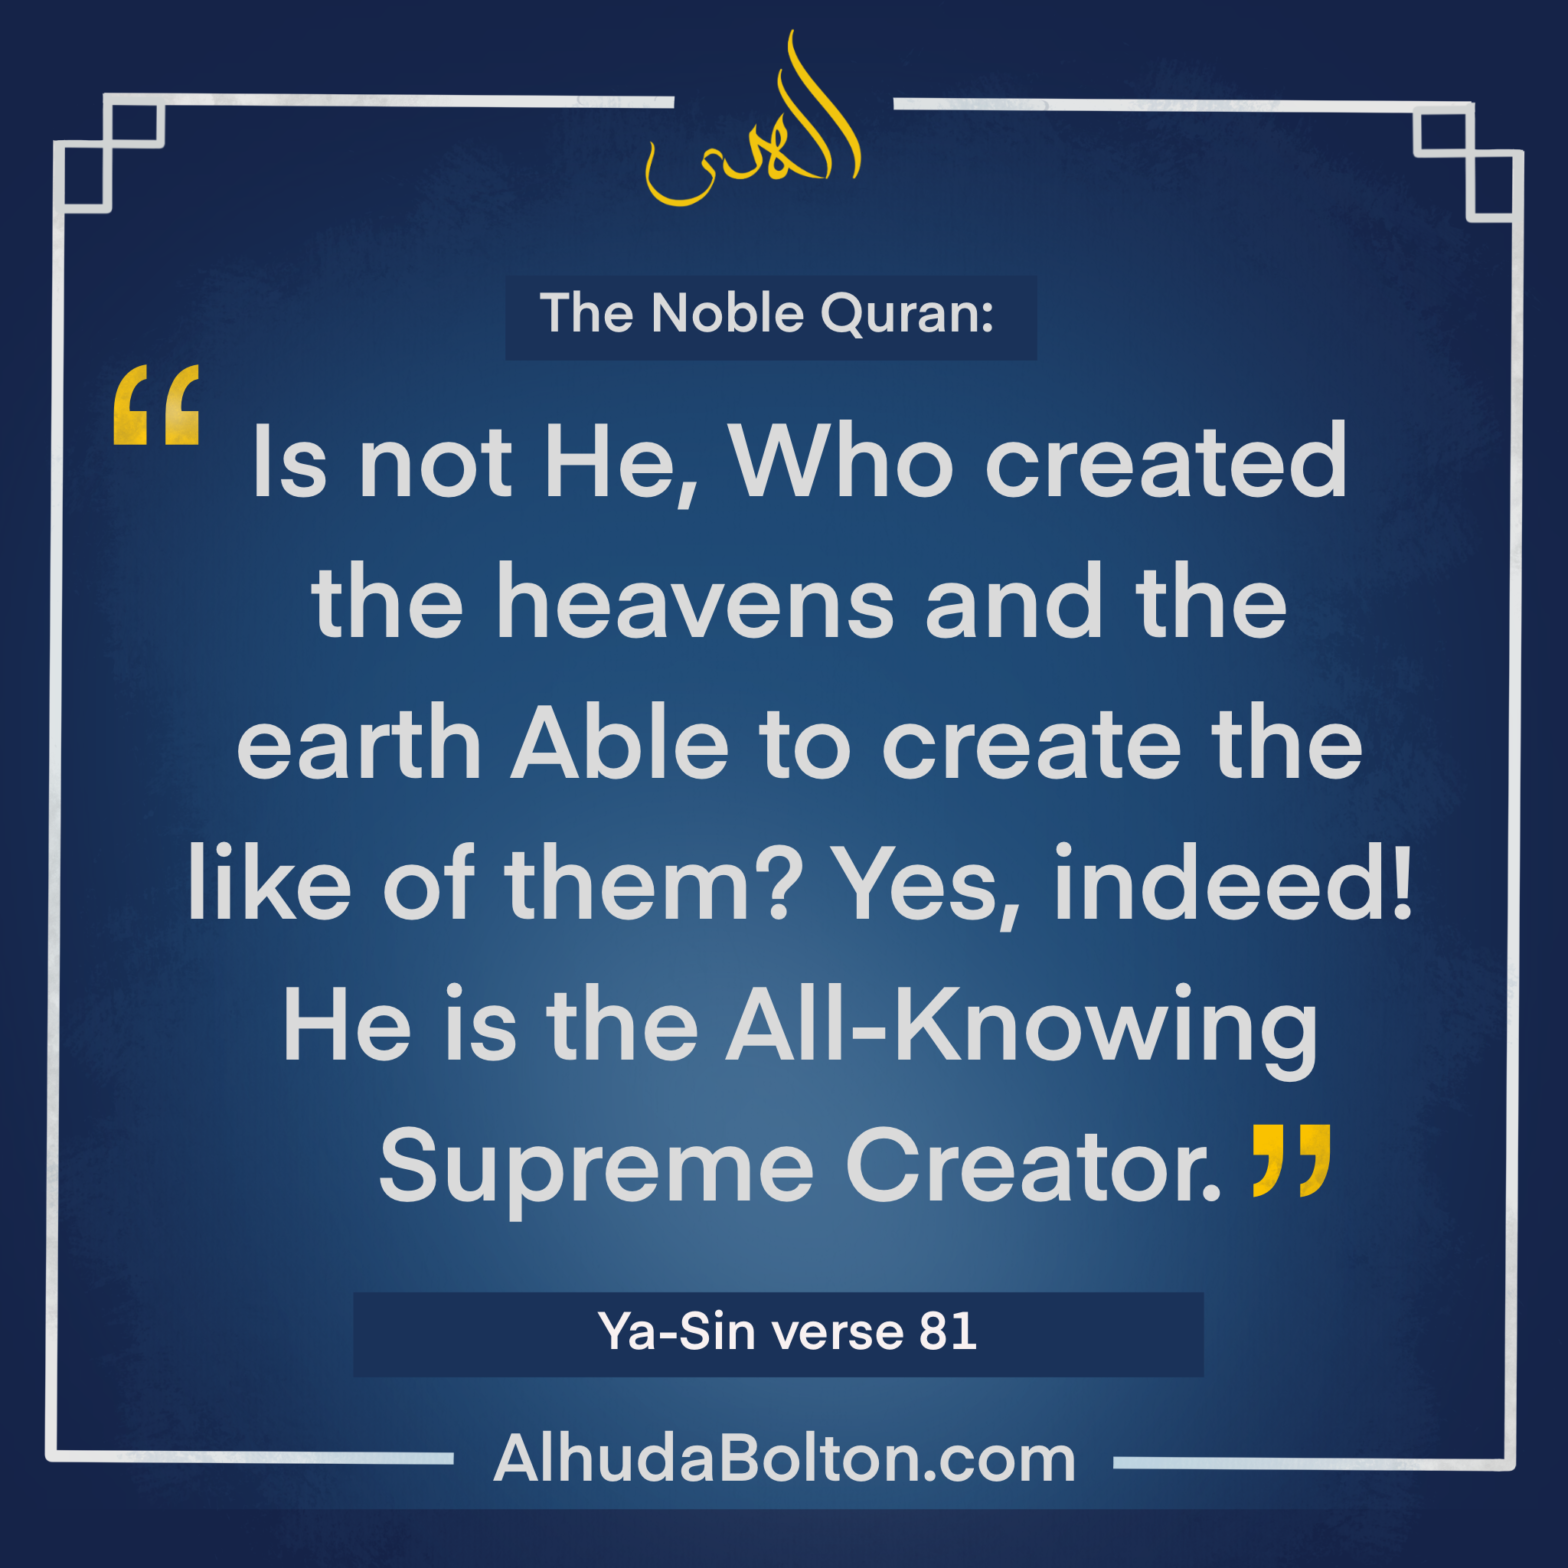 Quran verse: “..He is the All-Knowing Supreme Creator”